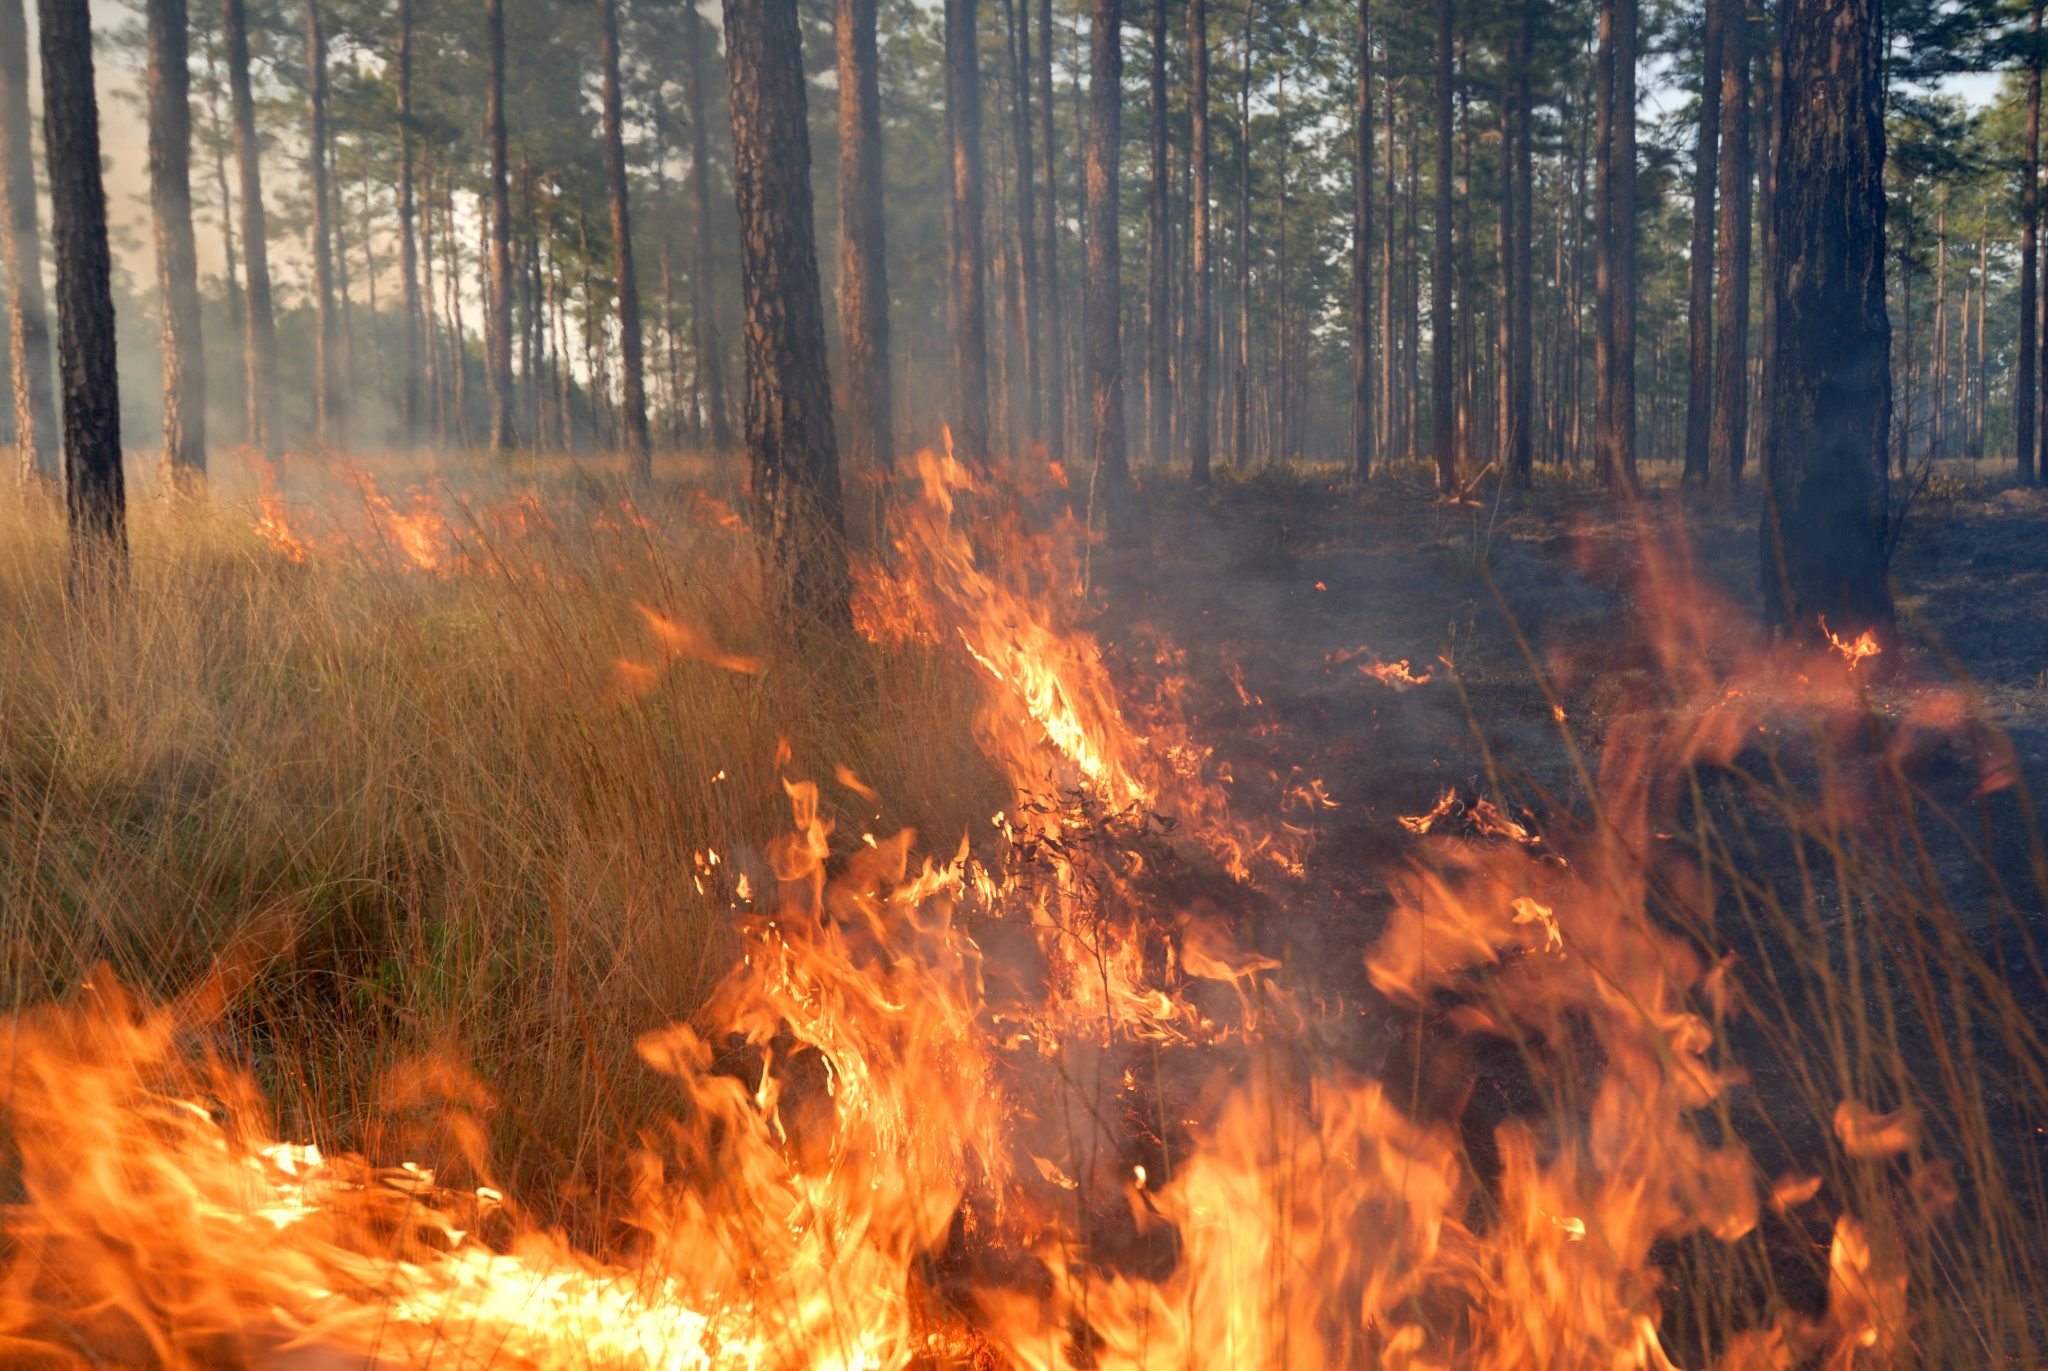 Prescribed fire in a pine forest